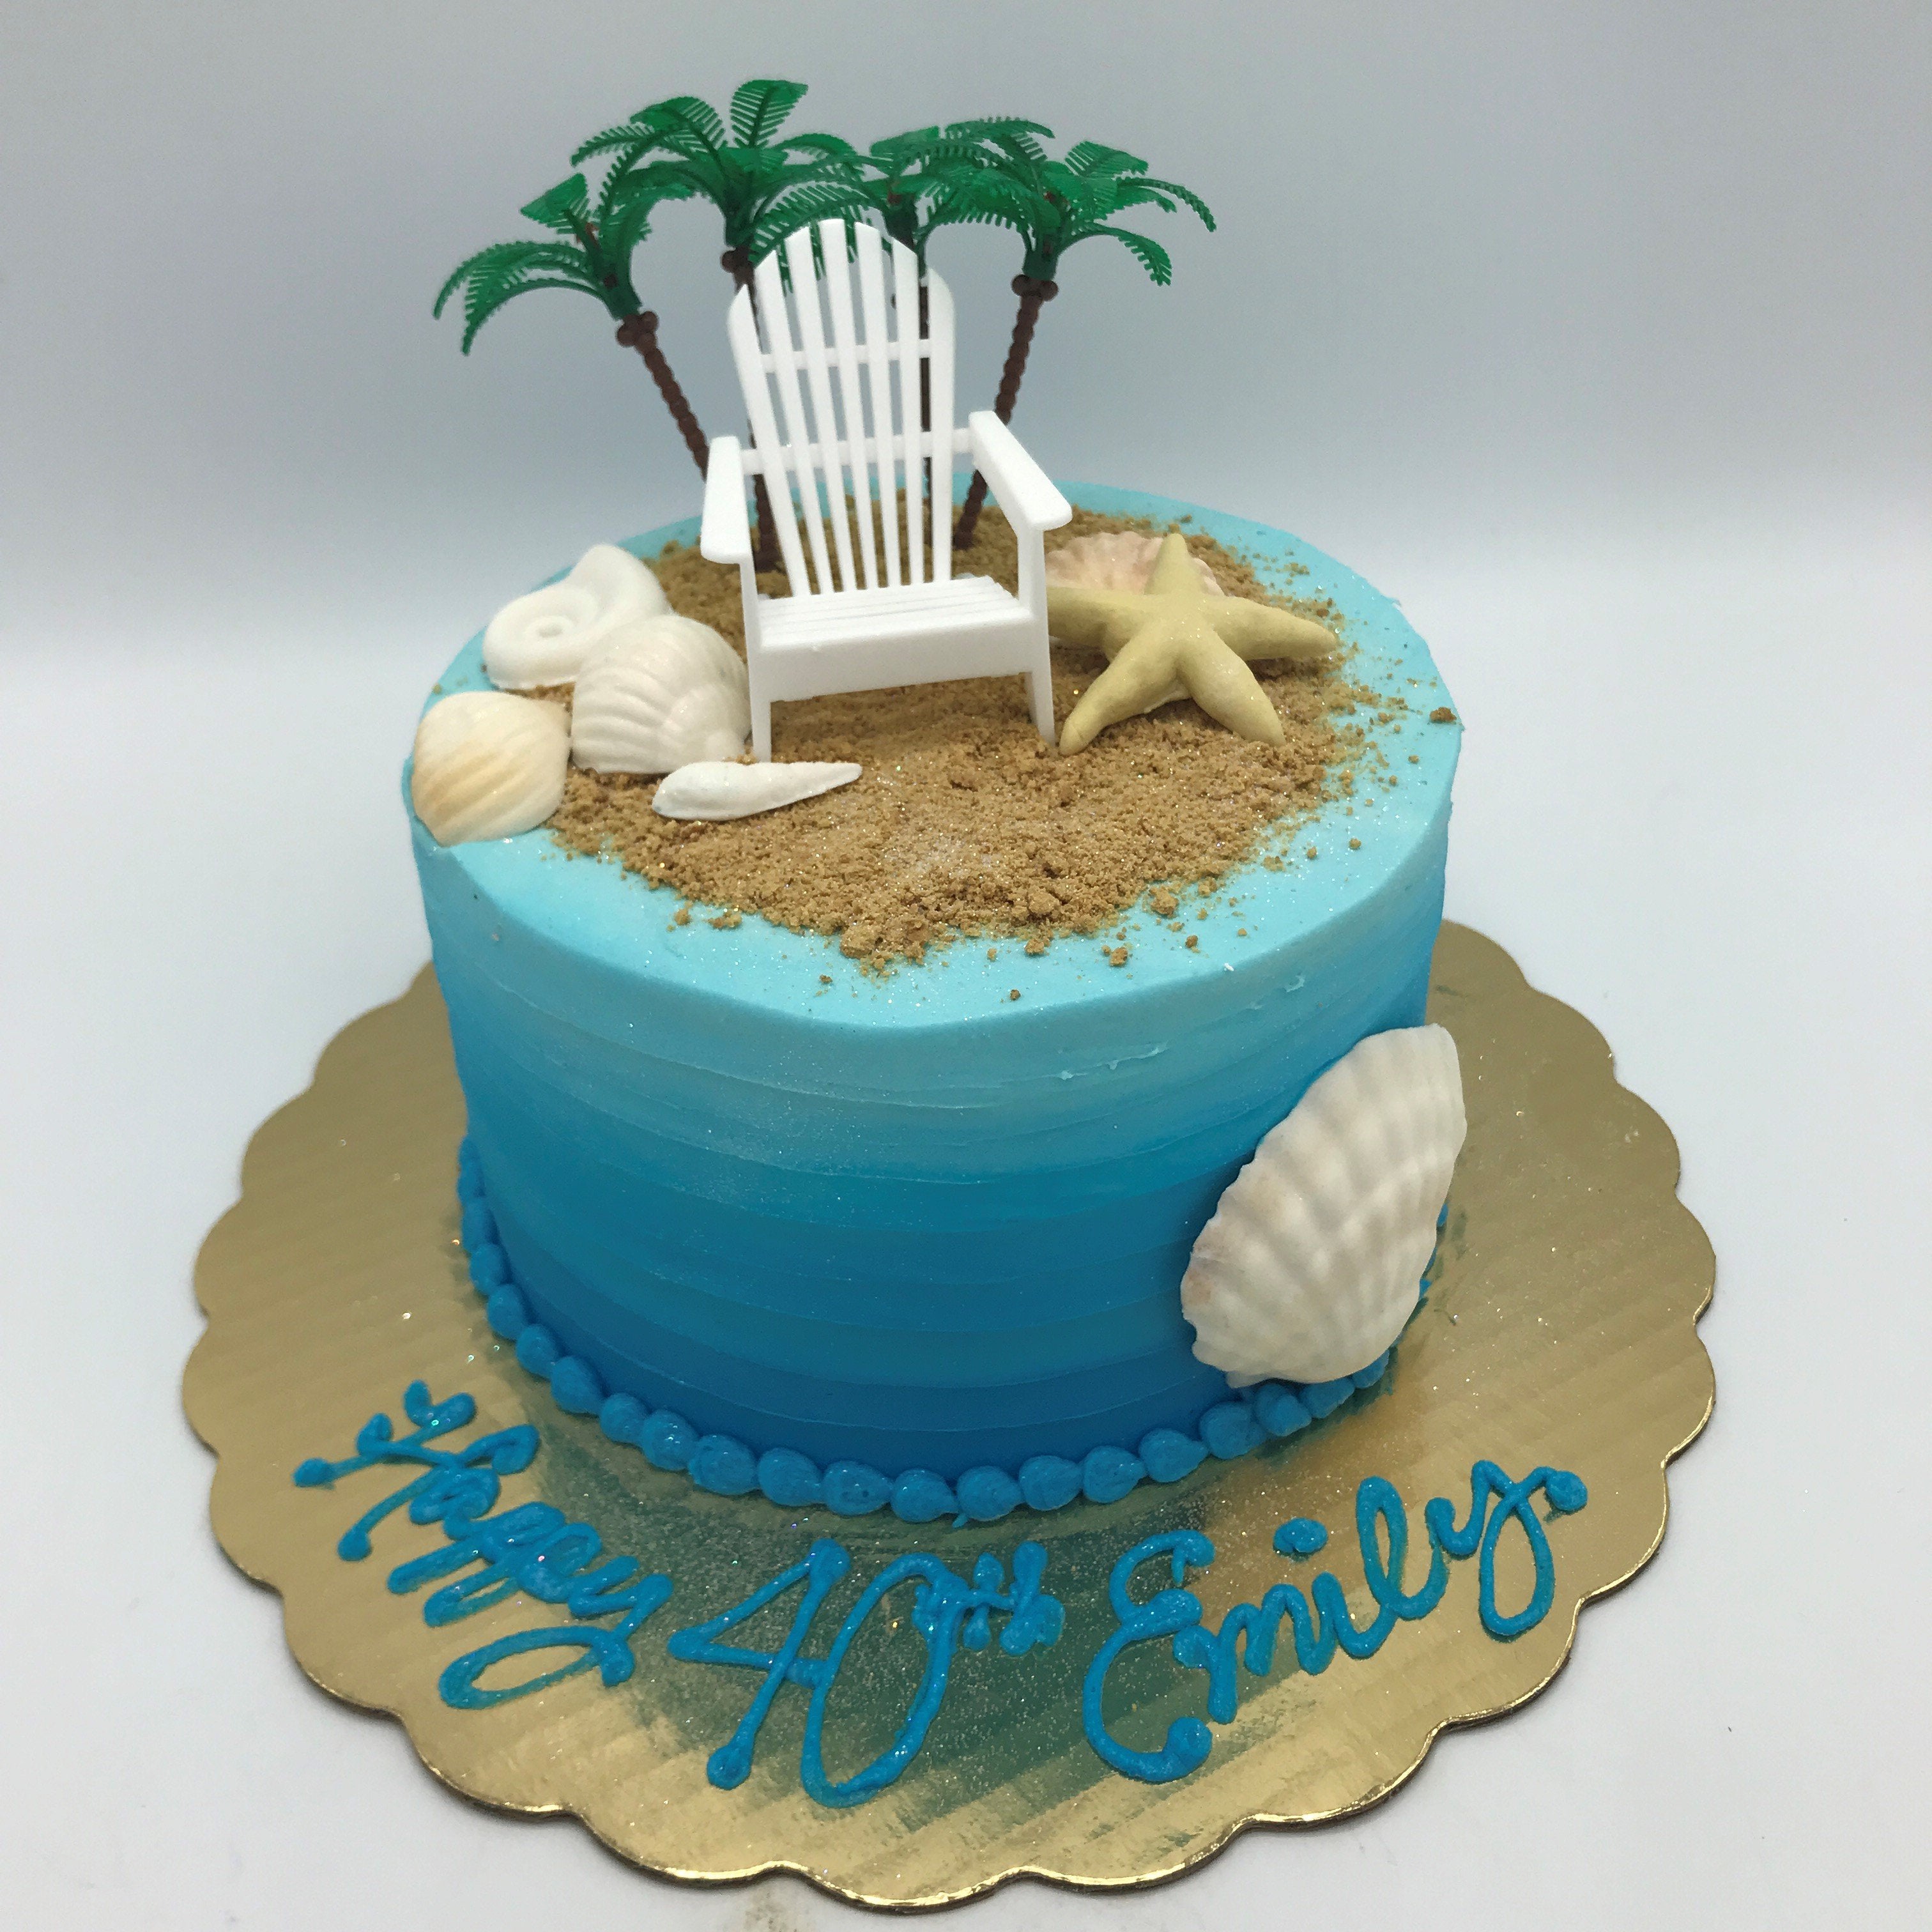 MAKE YOUR MOTHER'S DAY BY GIFTING HER A MISTER BAKER CUSTOM CAKE | UAE News  24/7